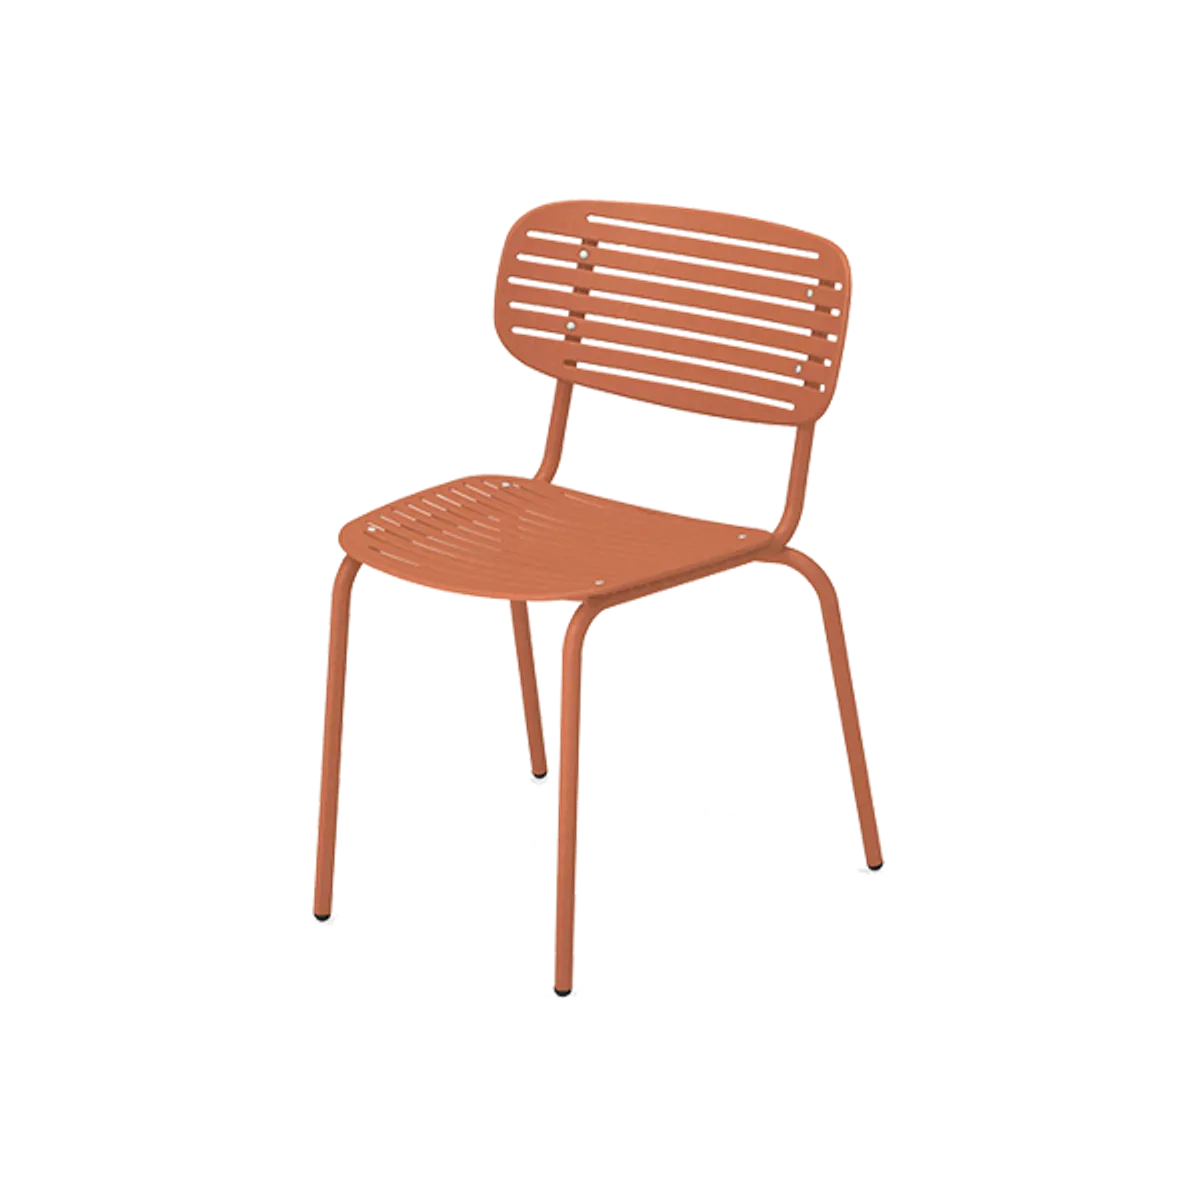 Web Mom Side Chair In Orange Metal Furniture For Outdoors